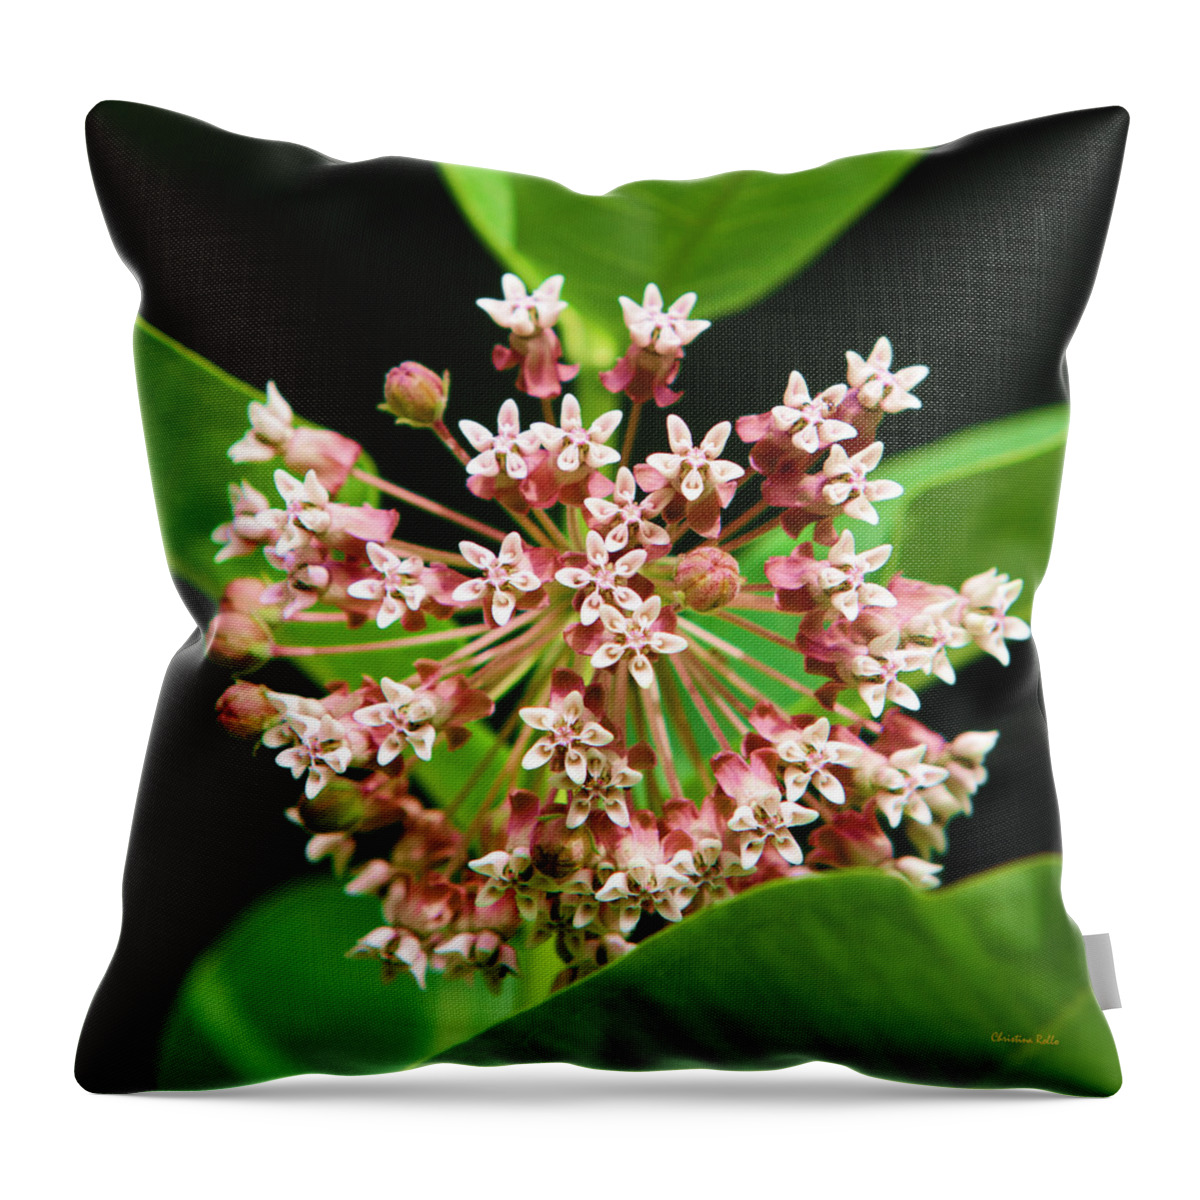 Milkweed Throw Pillow featuring the photograph Milkweed Flower by Christina Rollo